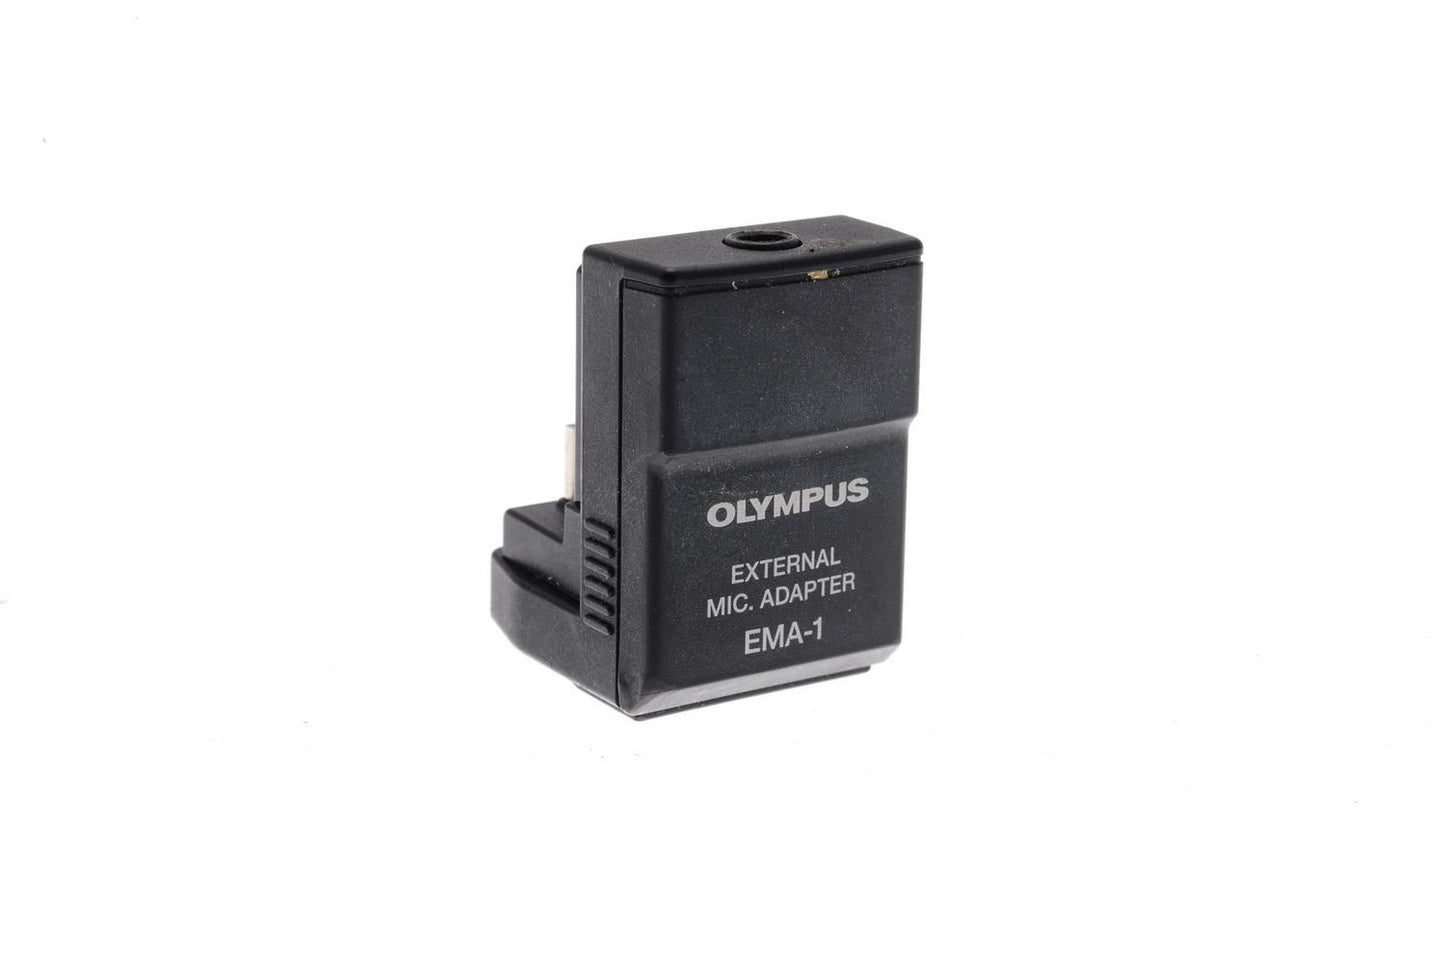 Olympus EMA-1 External Microphone Adapter - Accessory